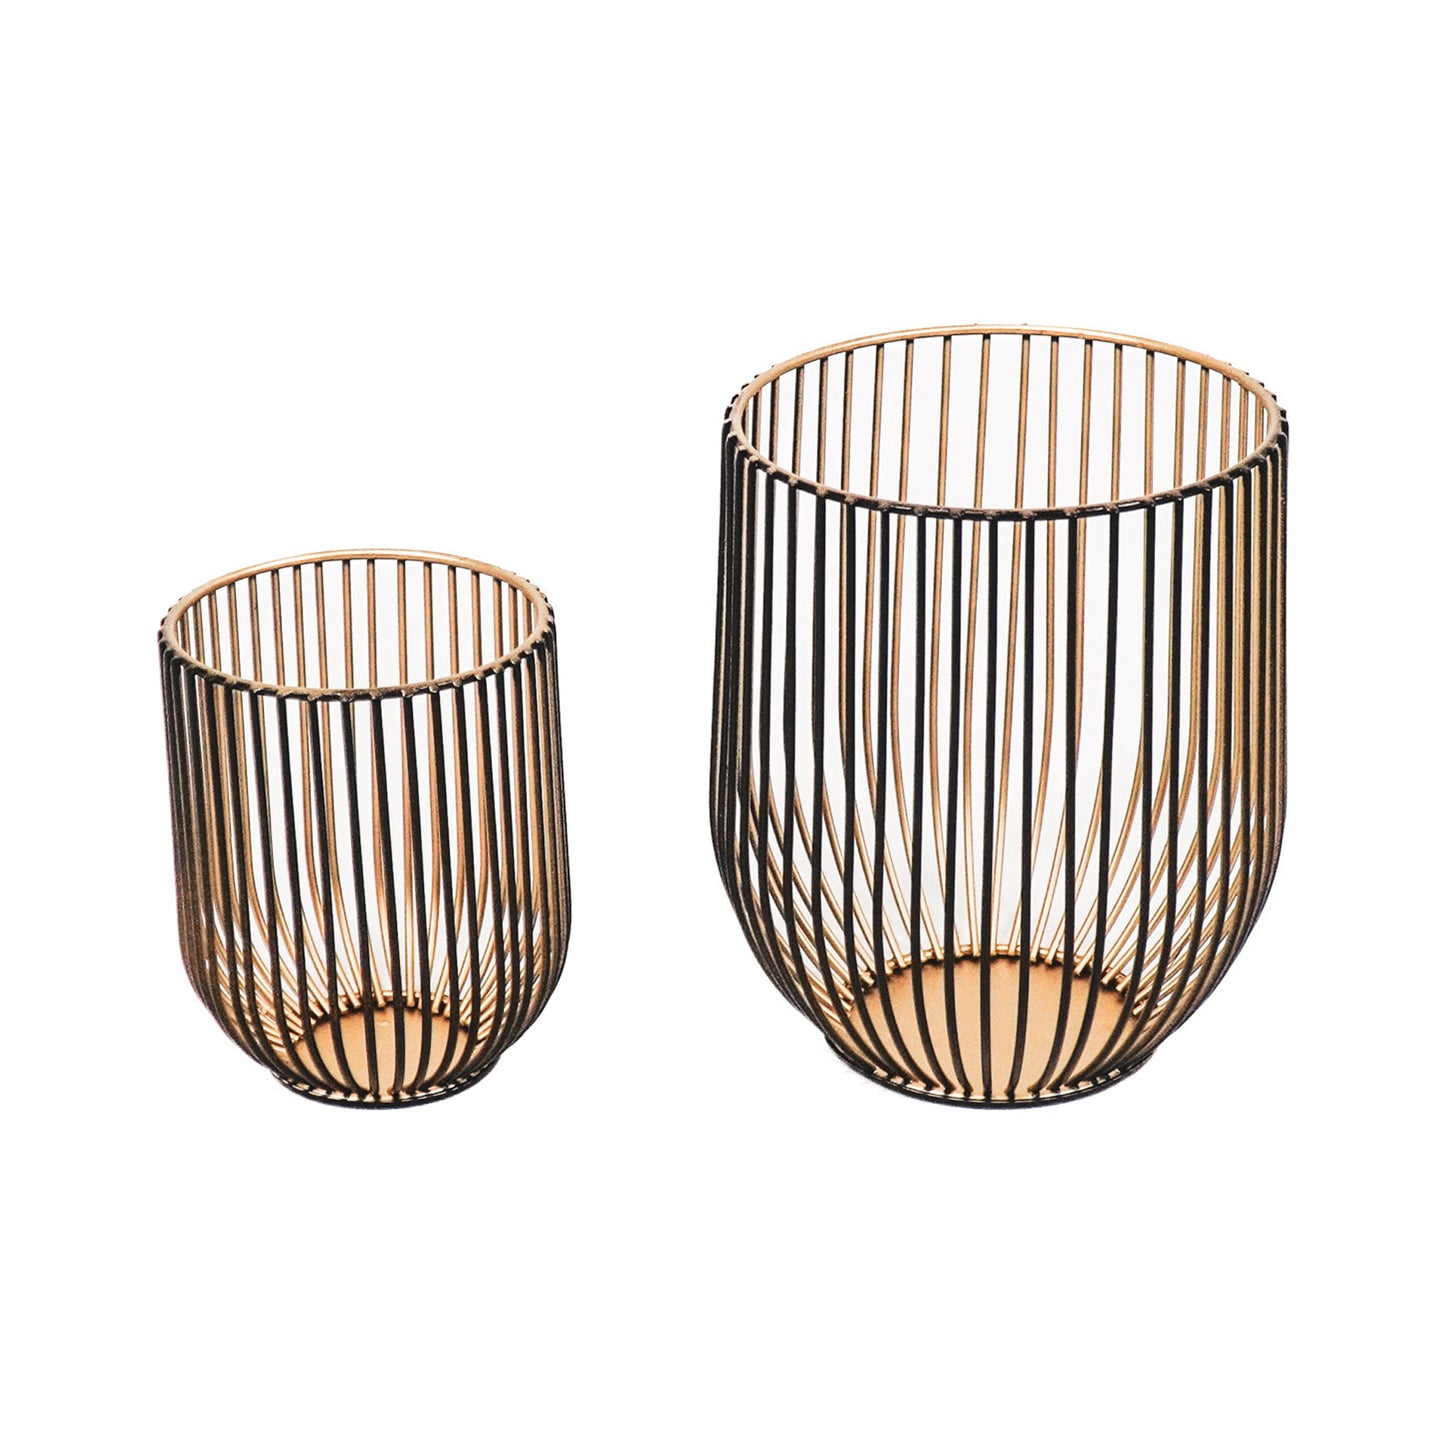 HV Set of 2 Metal Candle holders- Black/ Gold- 13x13x16cm and 9x9x11cm